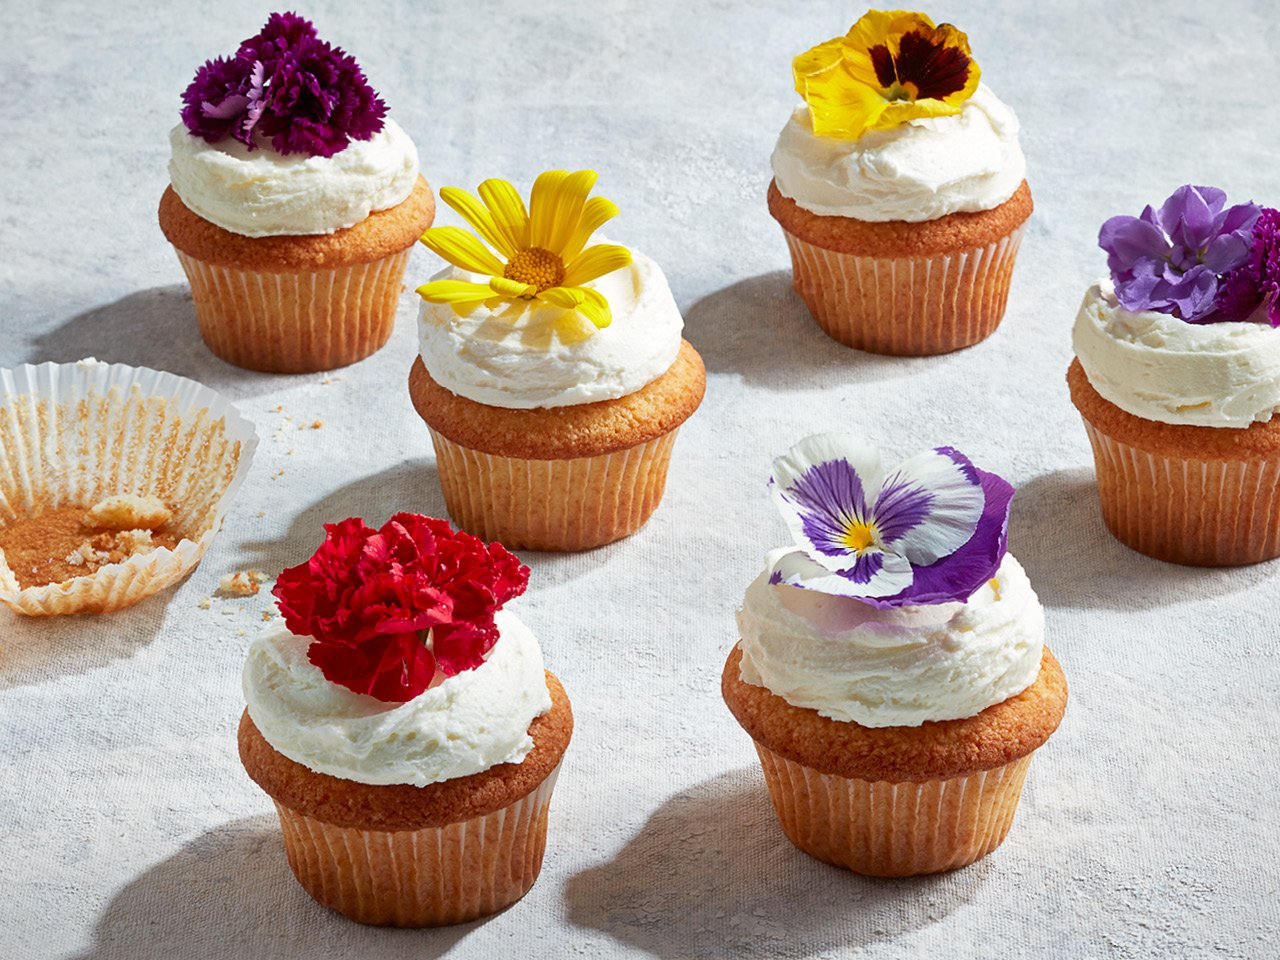 Lemon elderflower cupcakes topped with icing and flowers